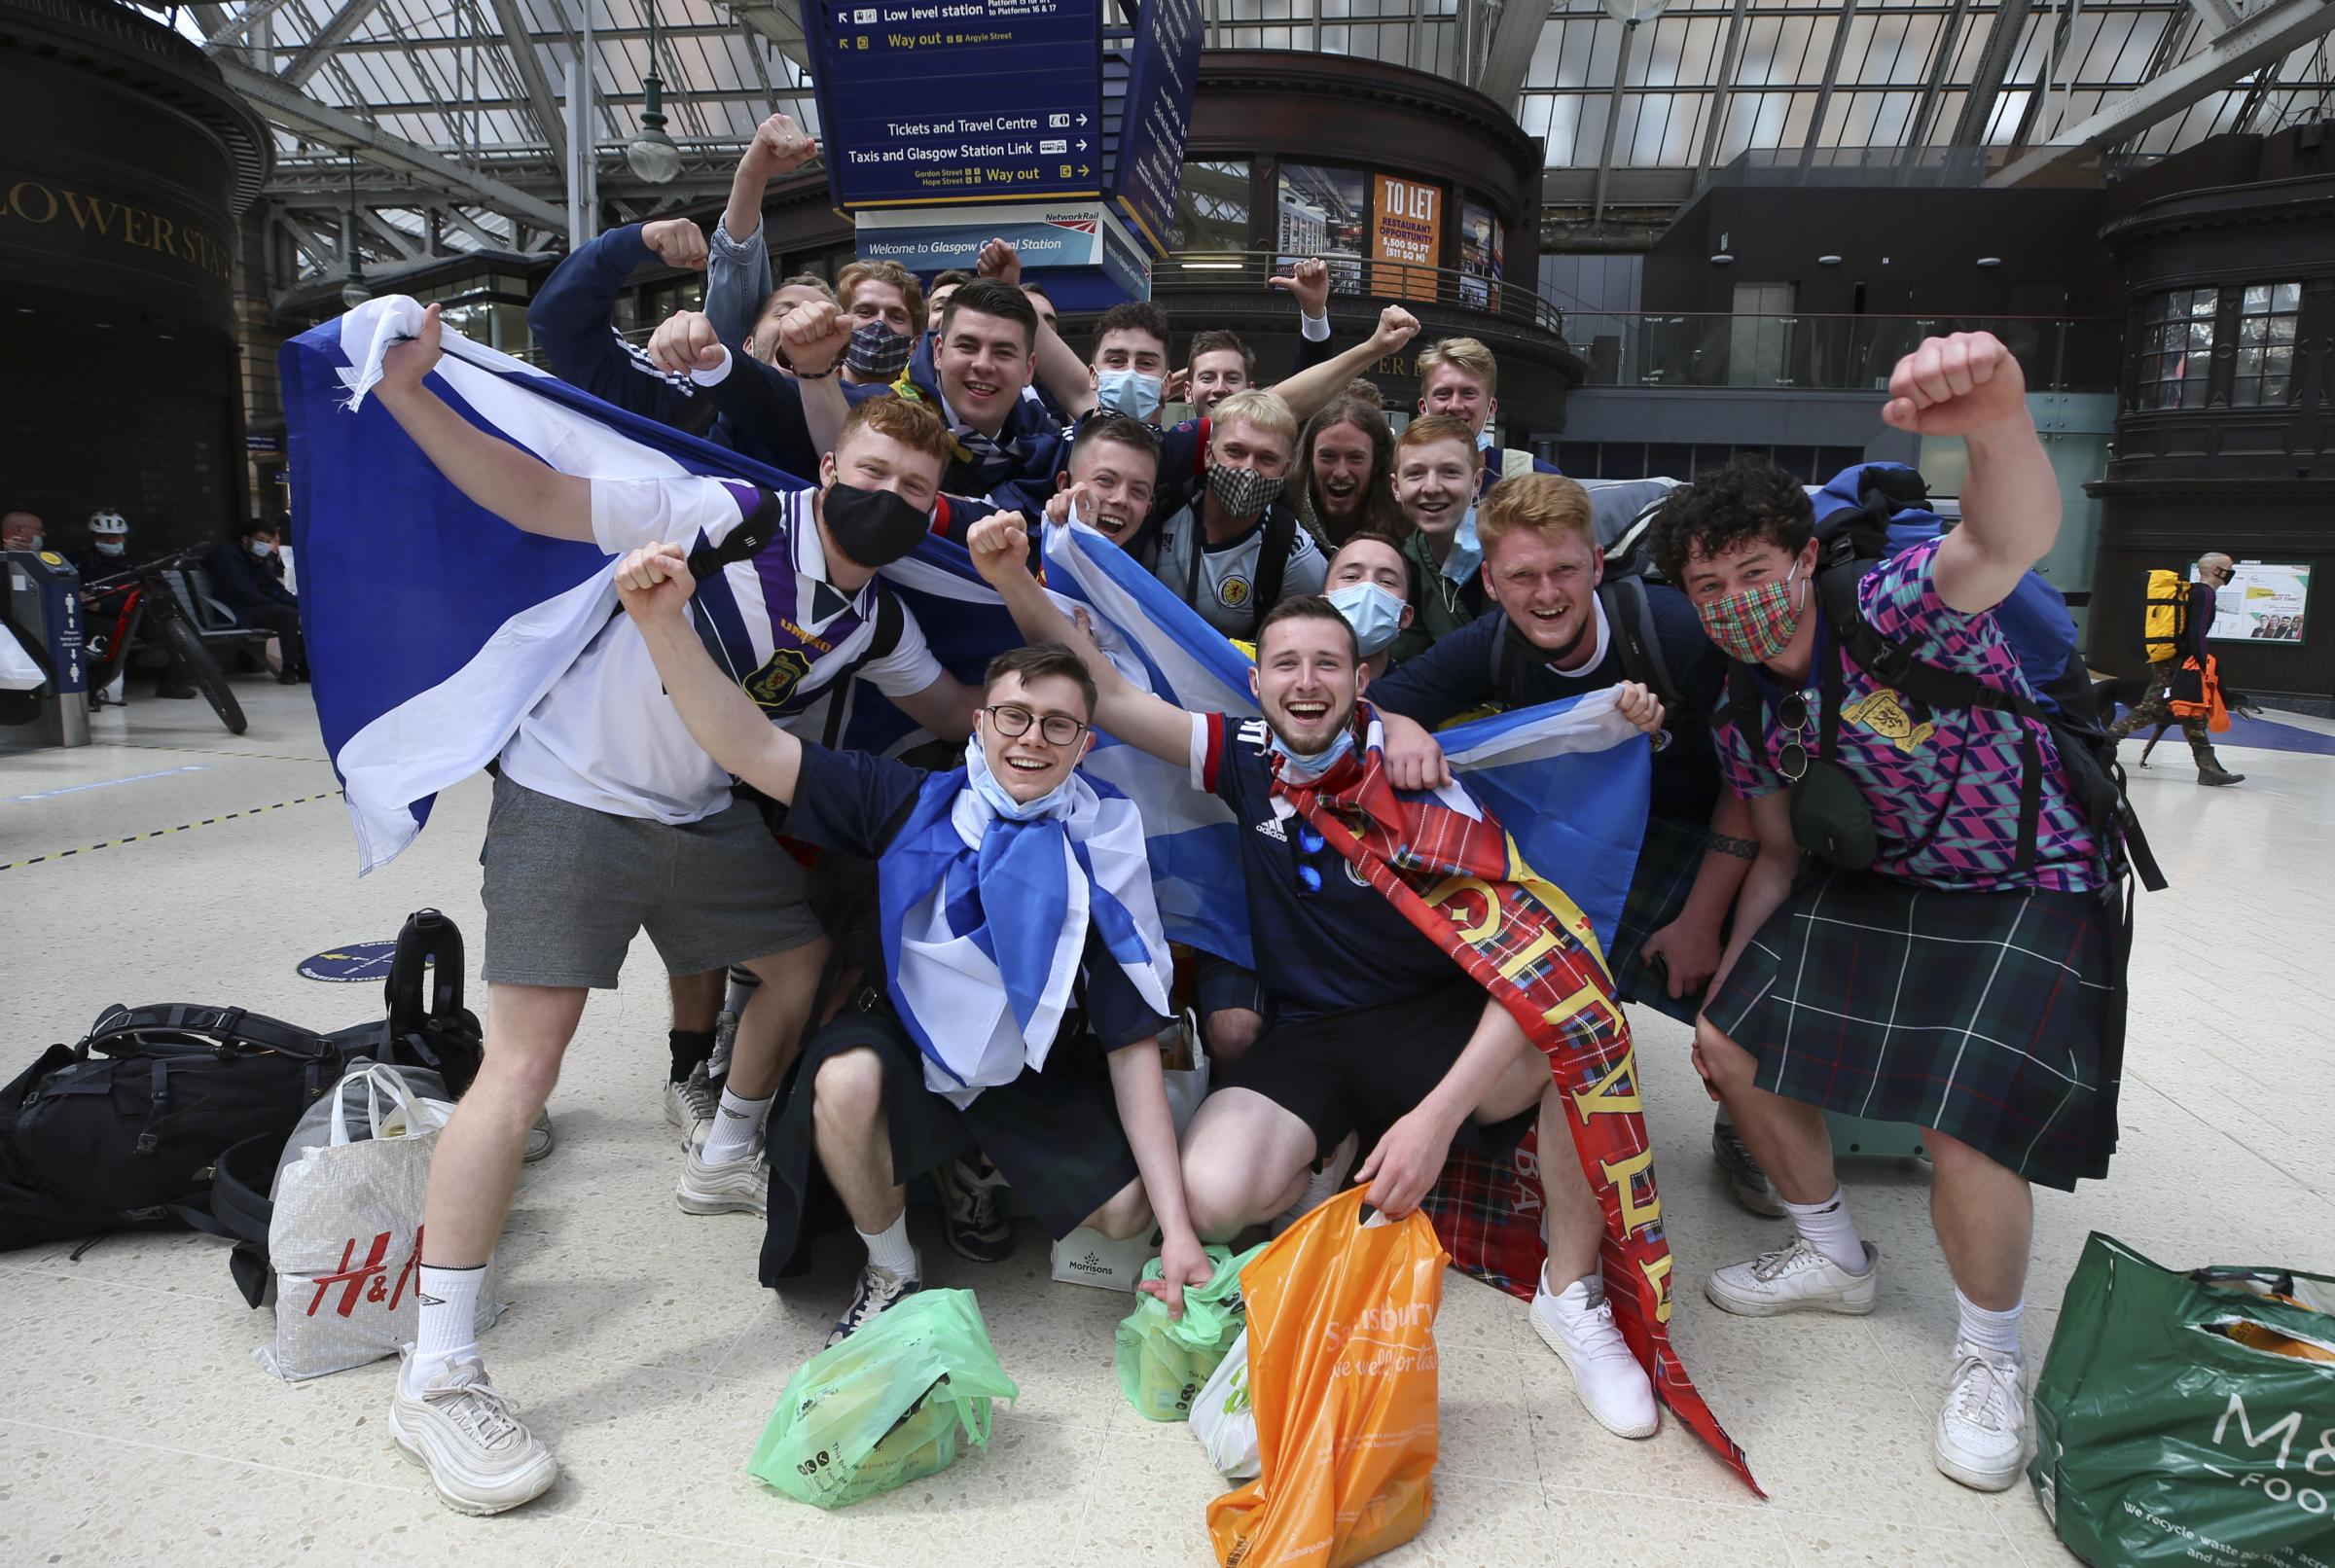 Scotland and England fans expected to drink 3.4m pints during game